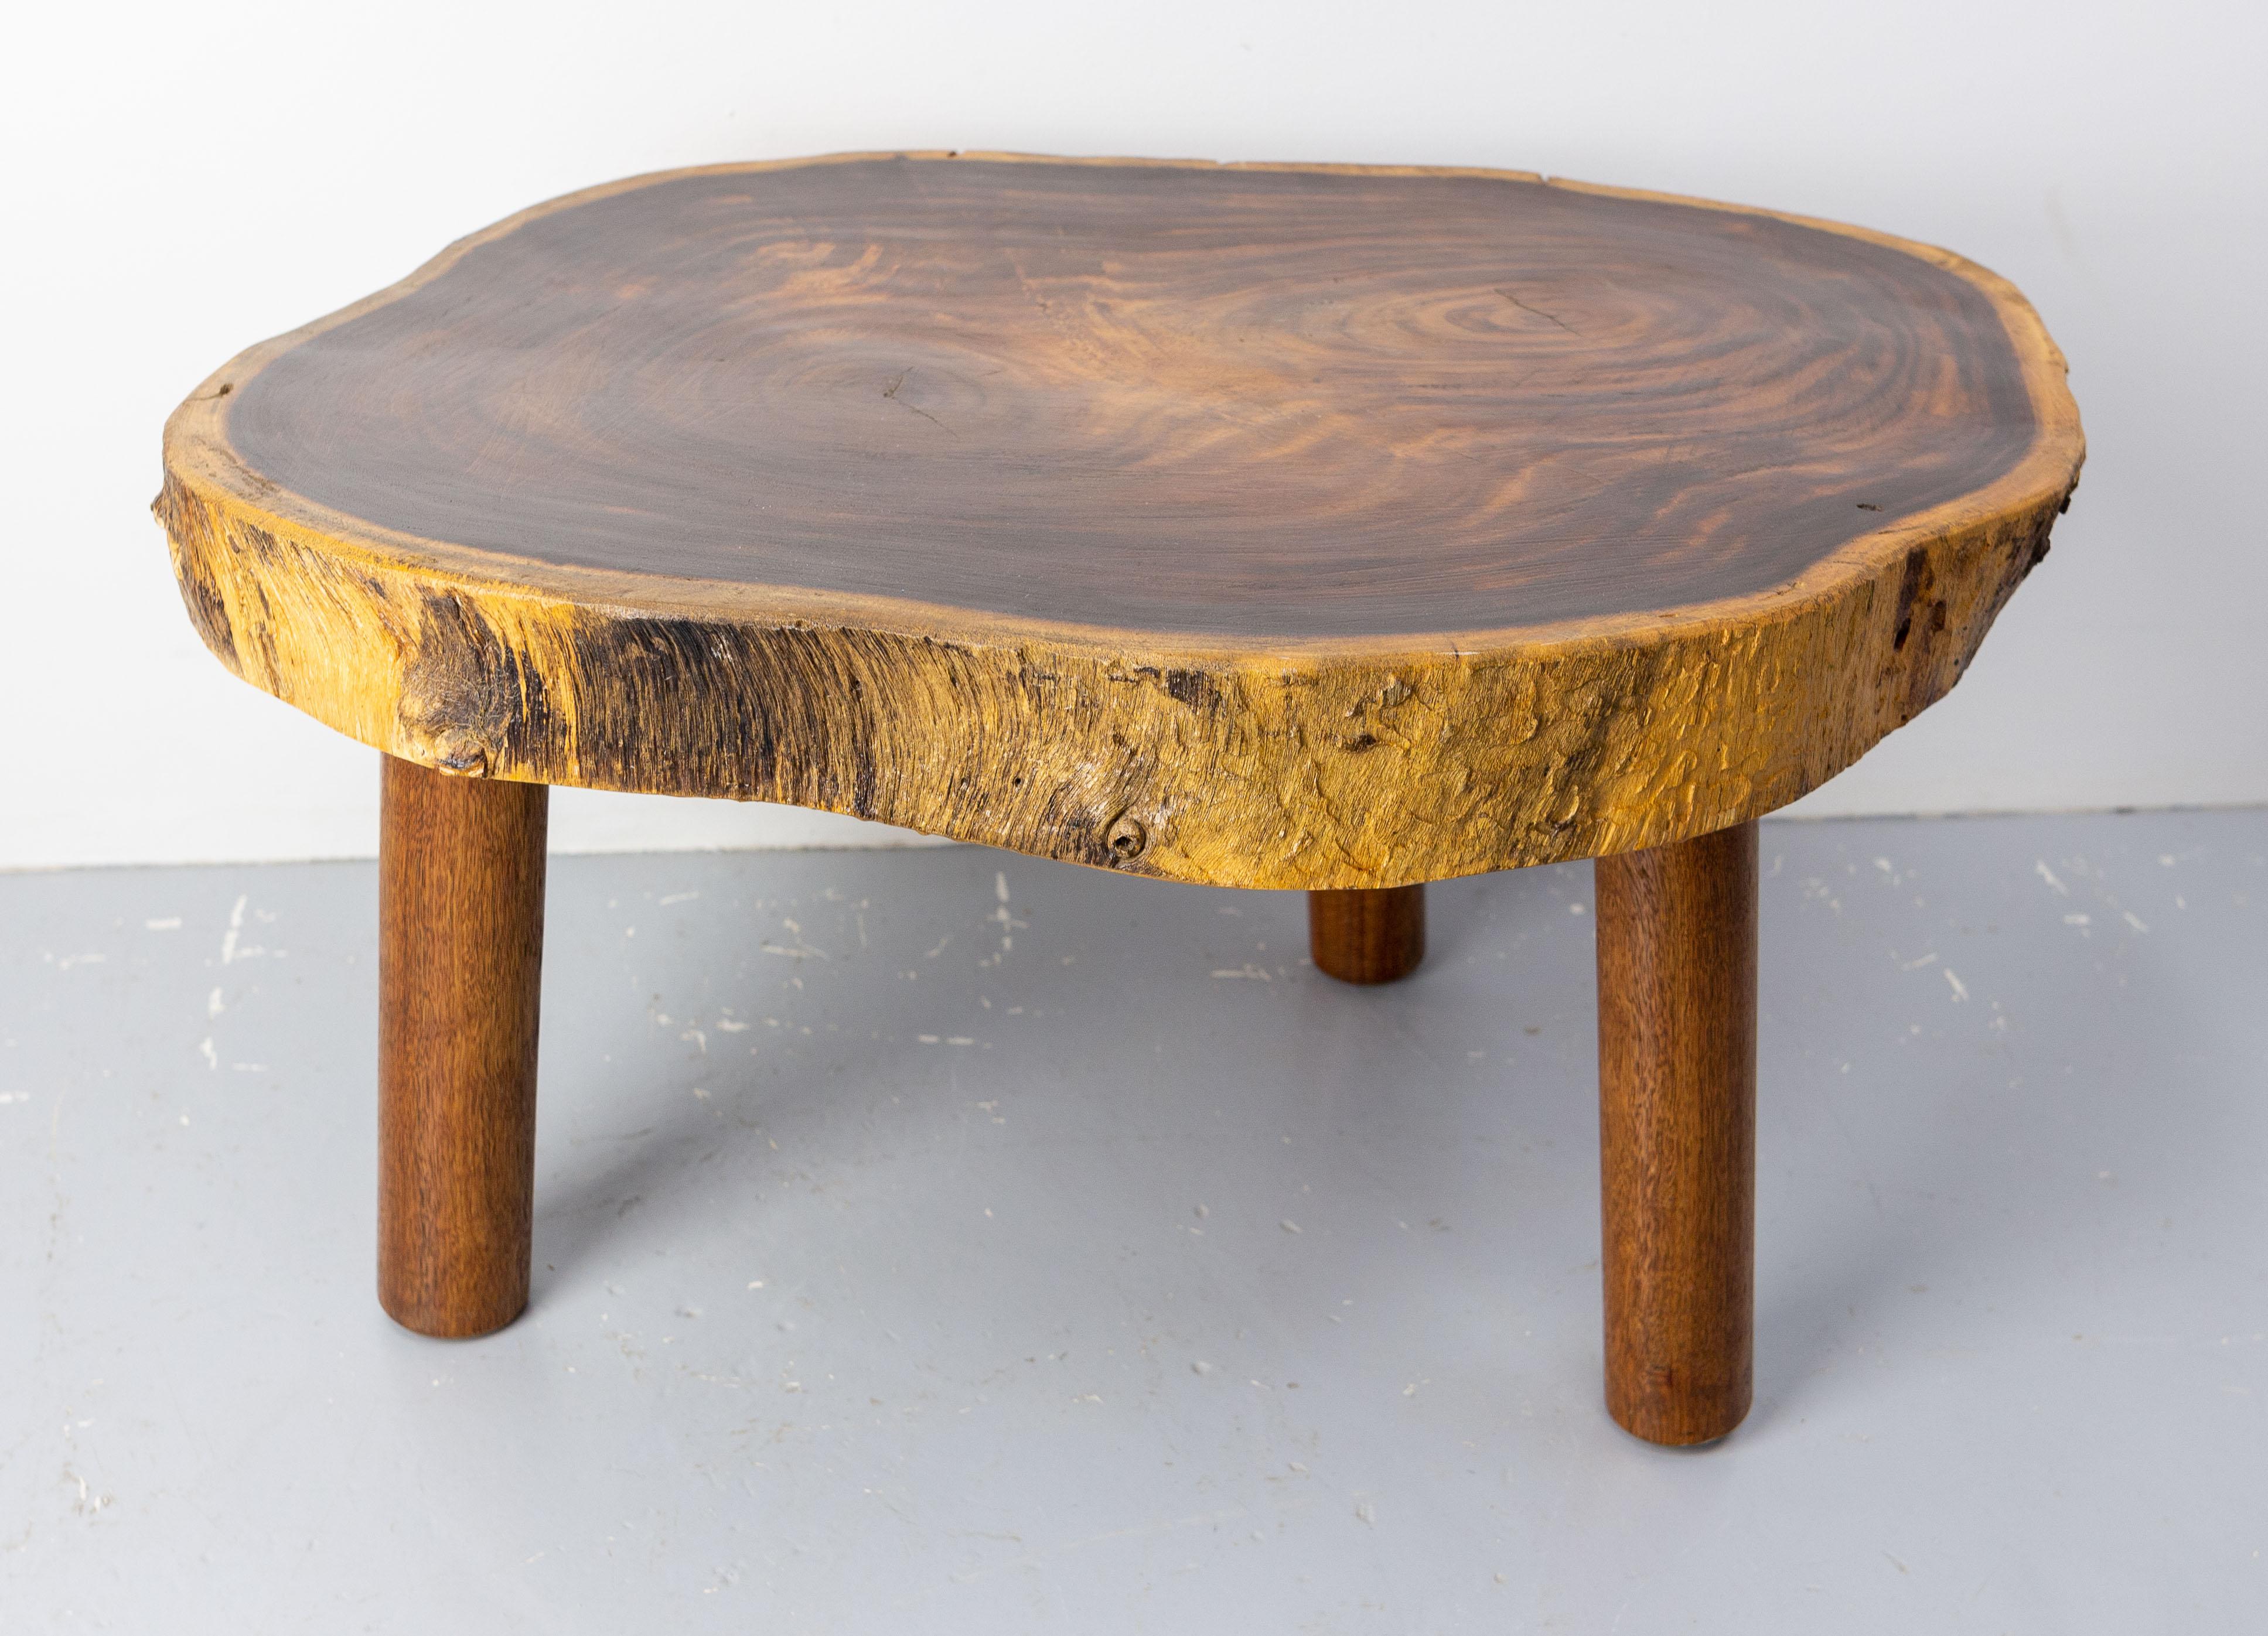 French midcentury coffee table with made with the trunc of a tree from Madagascar (Africa)
Brutalist top worn by 3 massive feet.
In good condition, with marks of use on the top, few disturbing. 

Shipping:
 60 / 78.5 / 42 22.5 kg